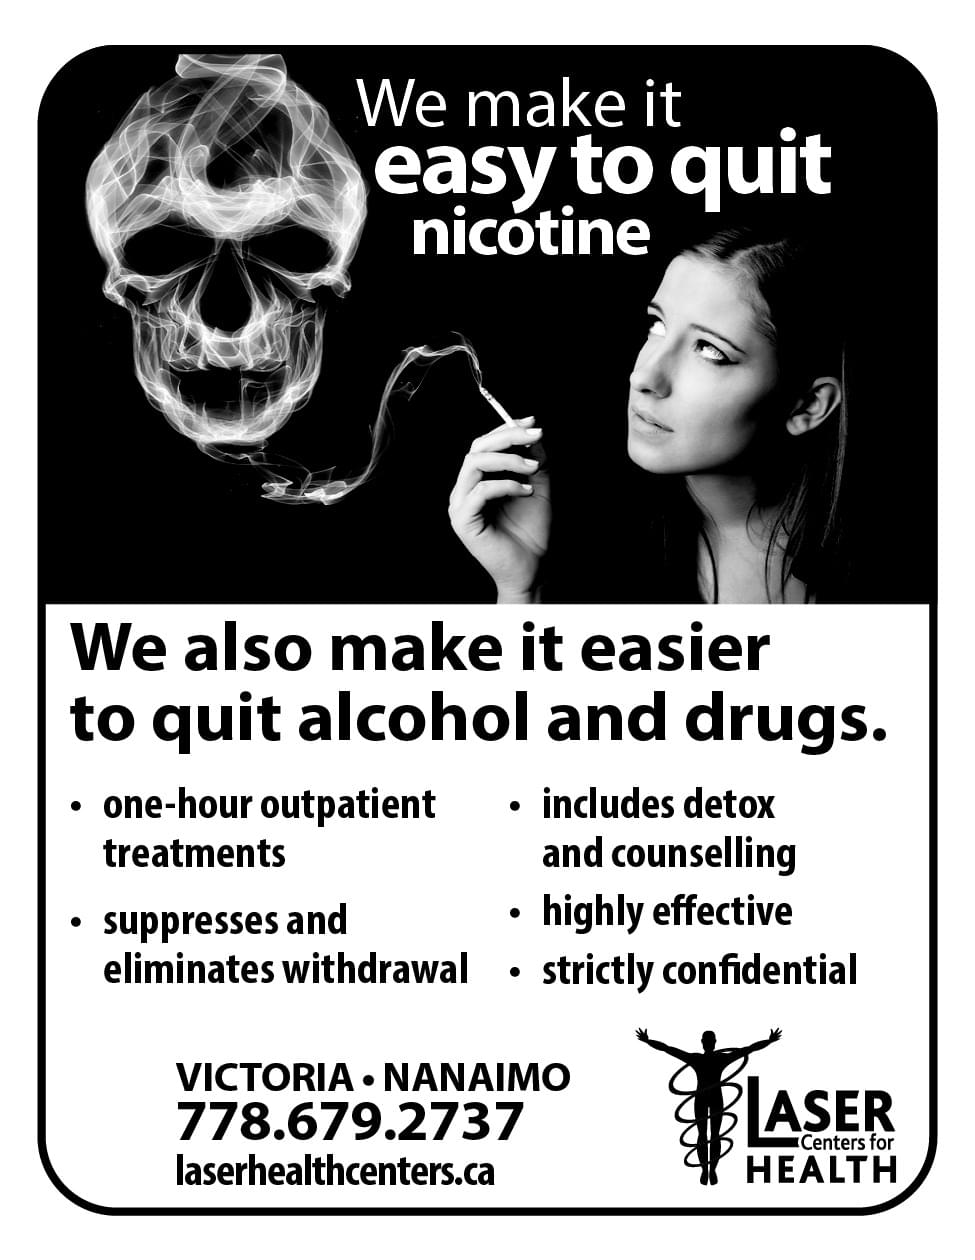 Laser Centers for Health ad in Coffee News